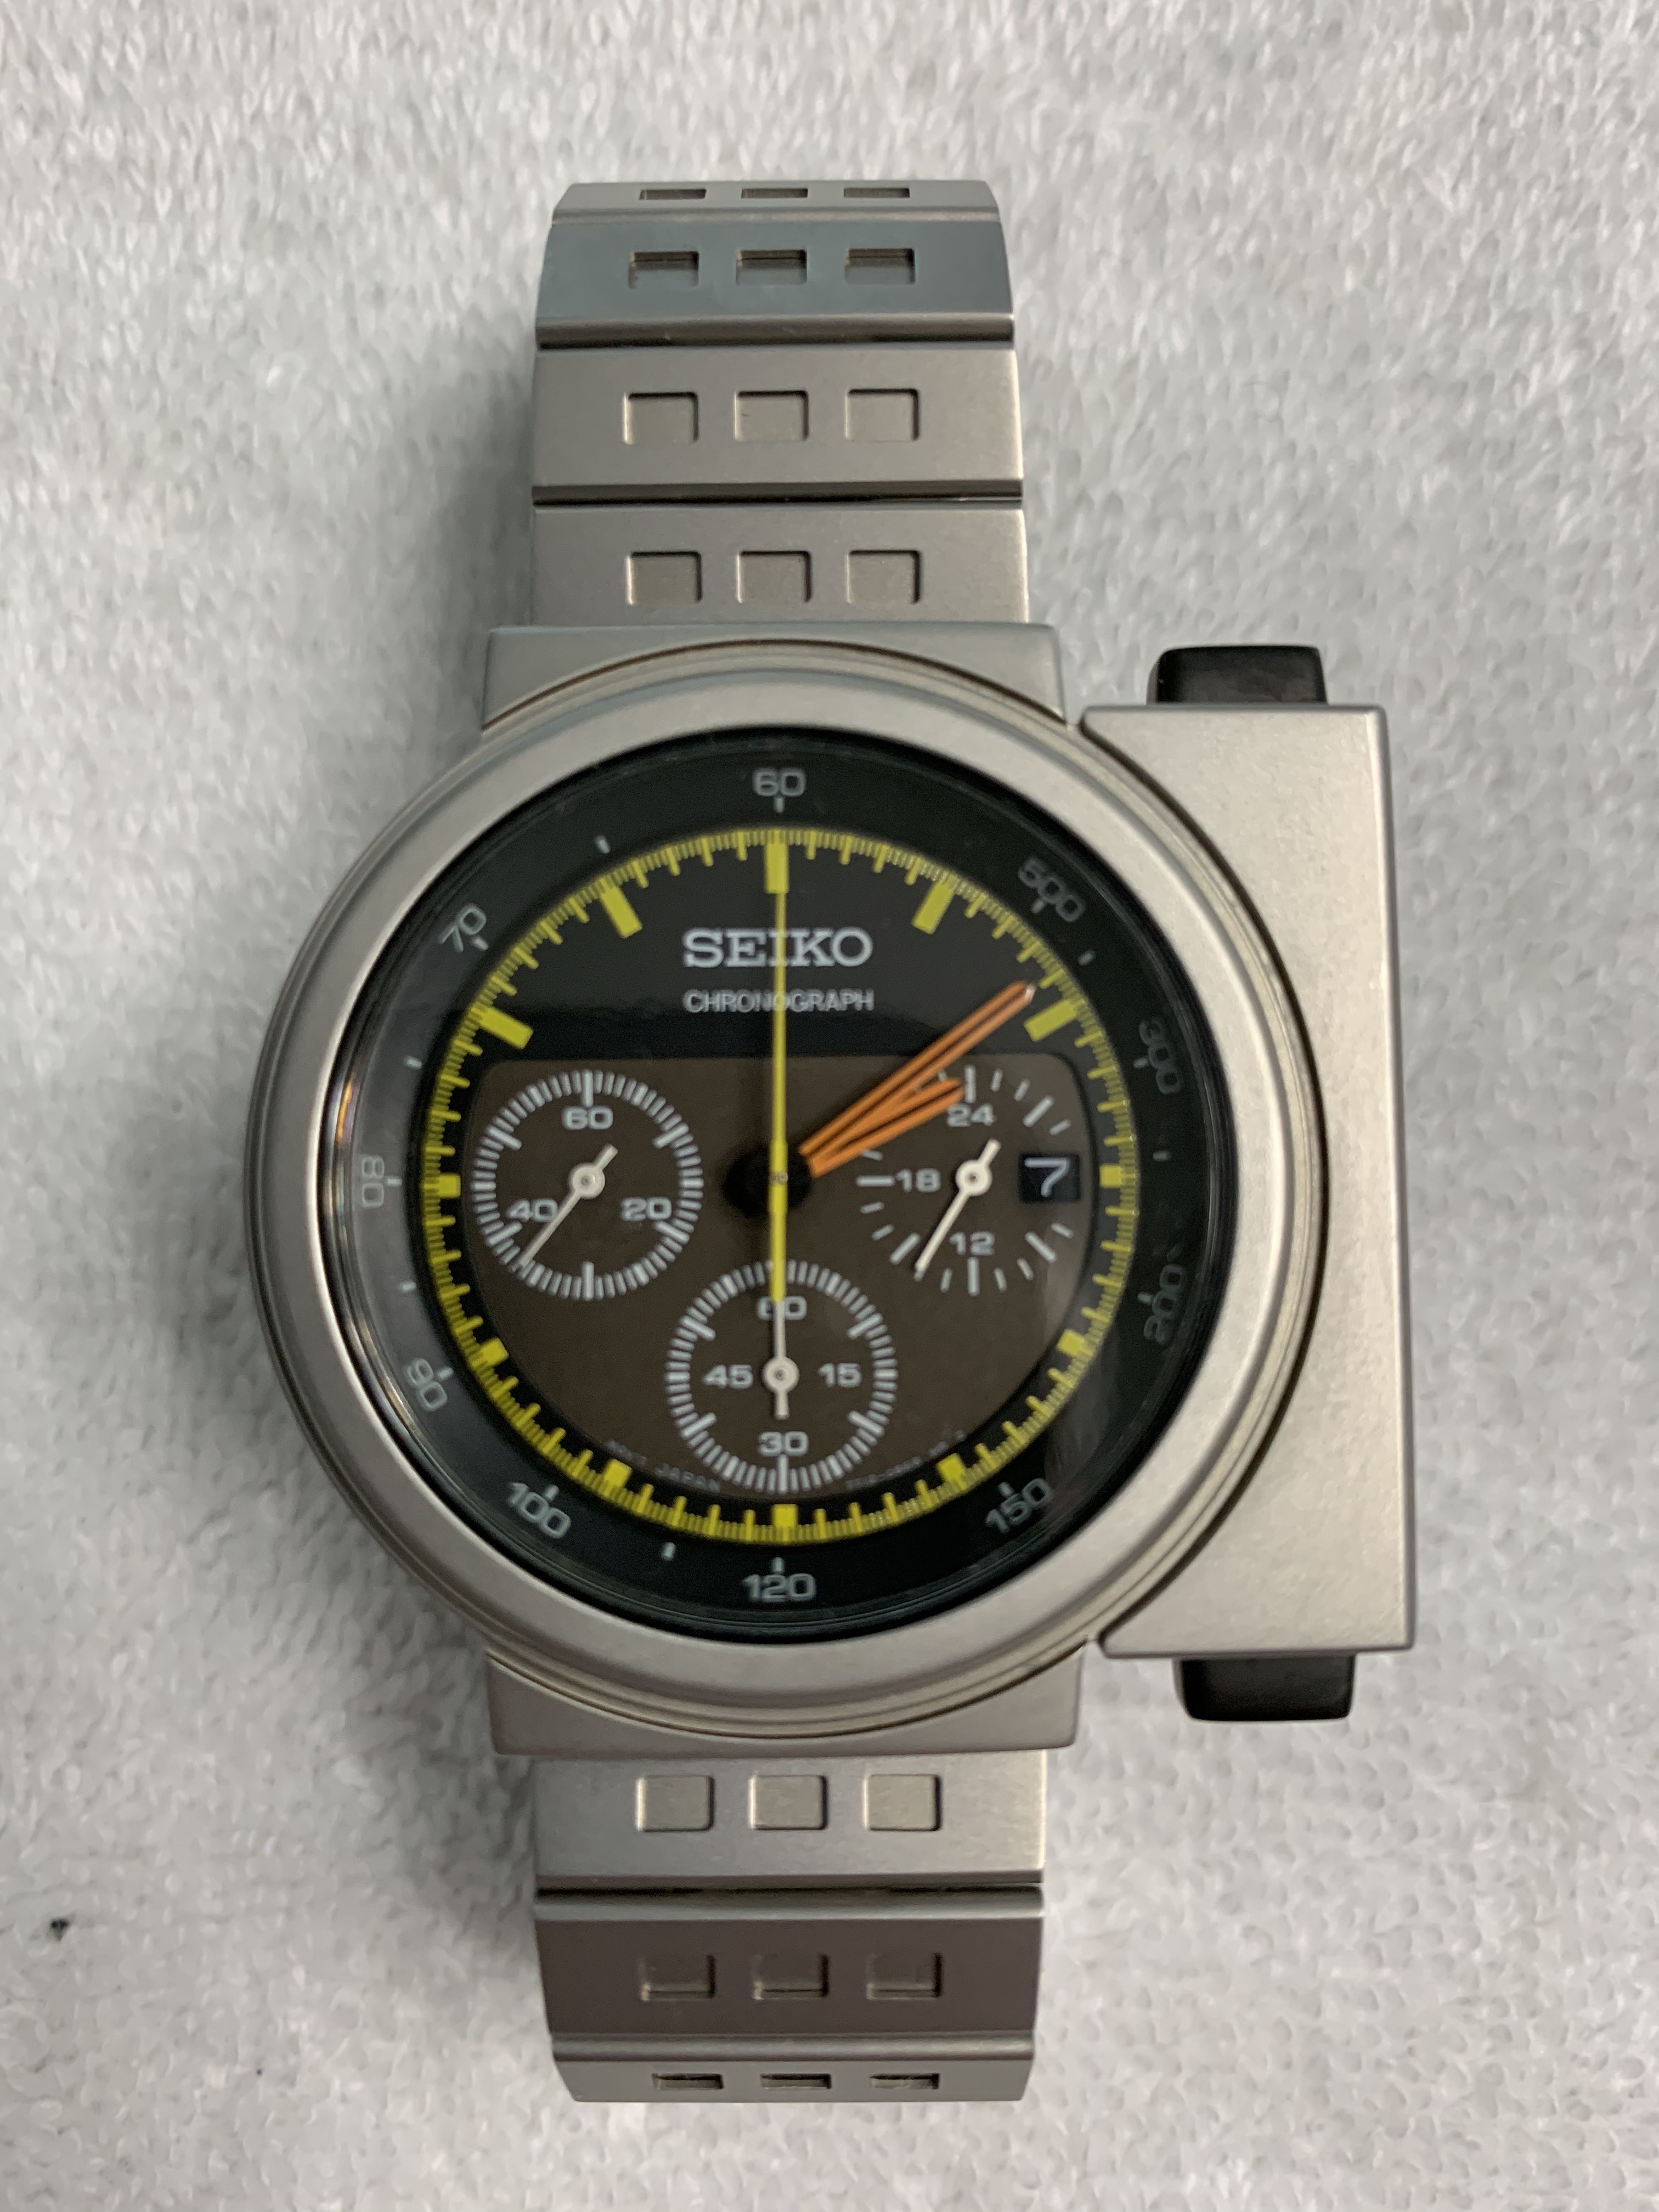 FOR SALE: Limited Edition Seiko SCED035 